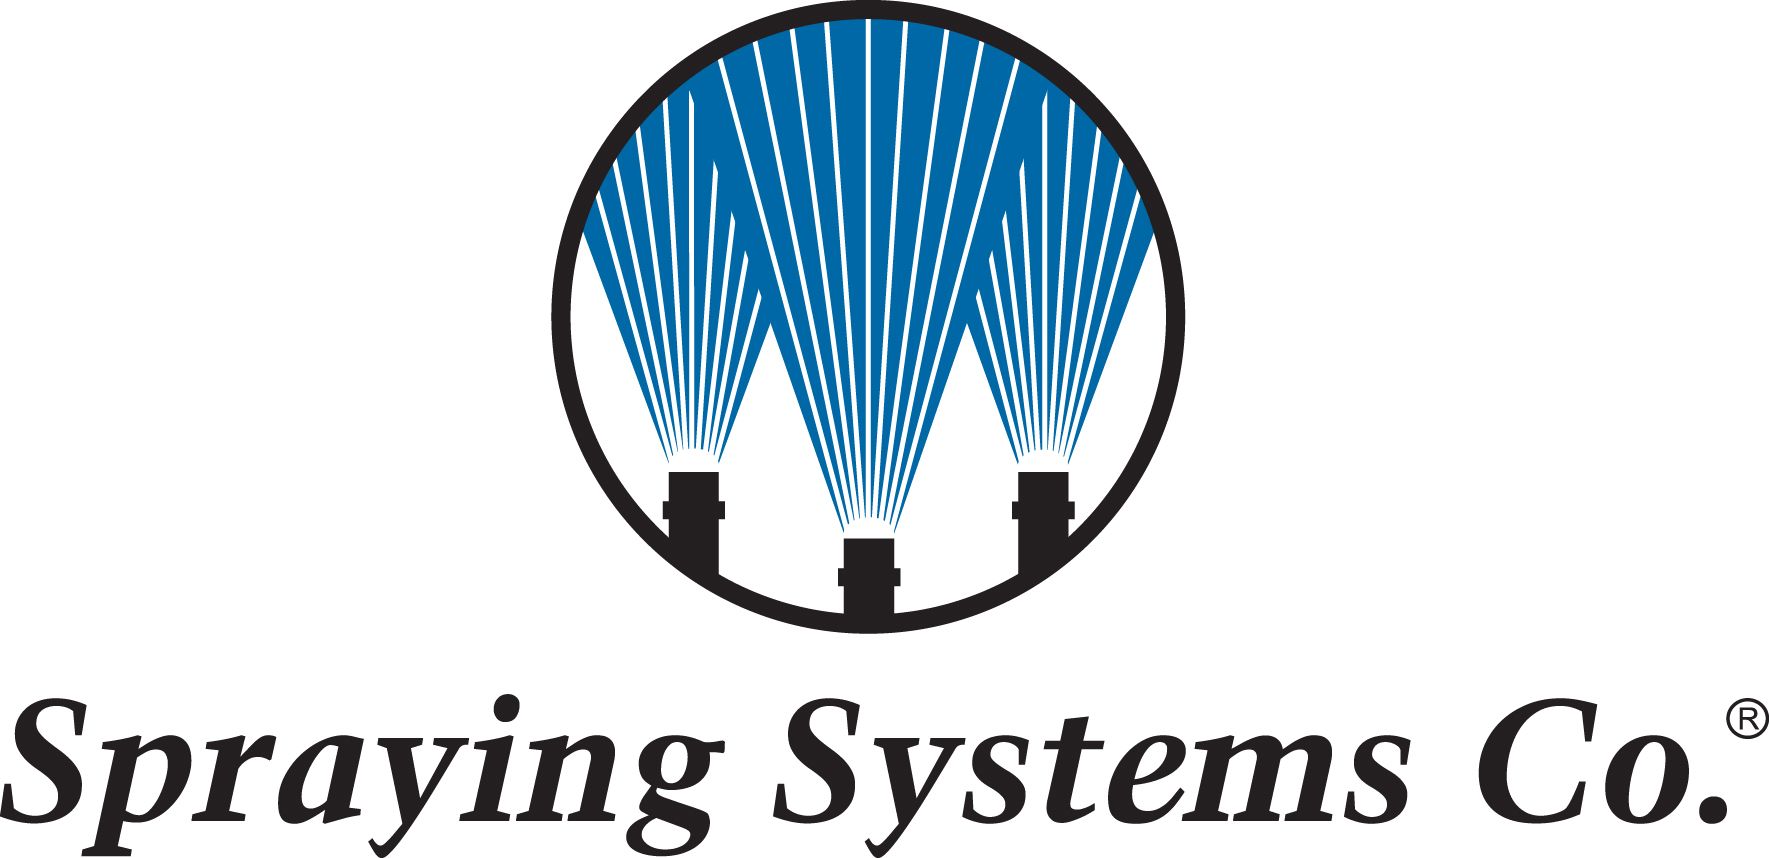 Spraying Systems Co.®️